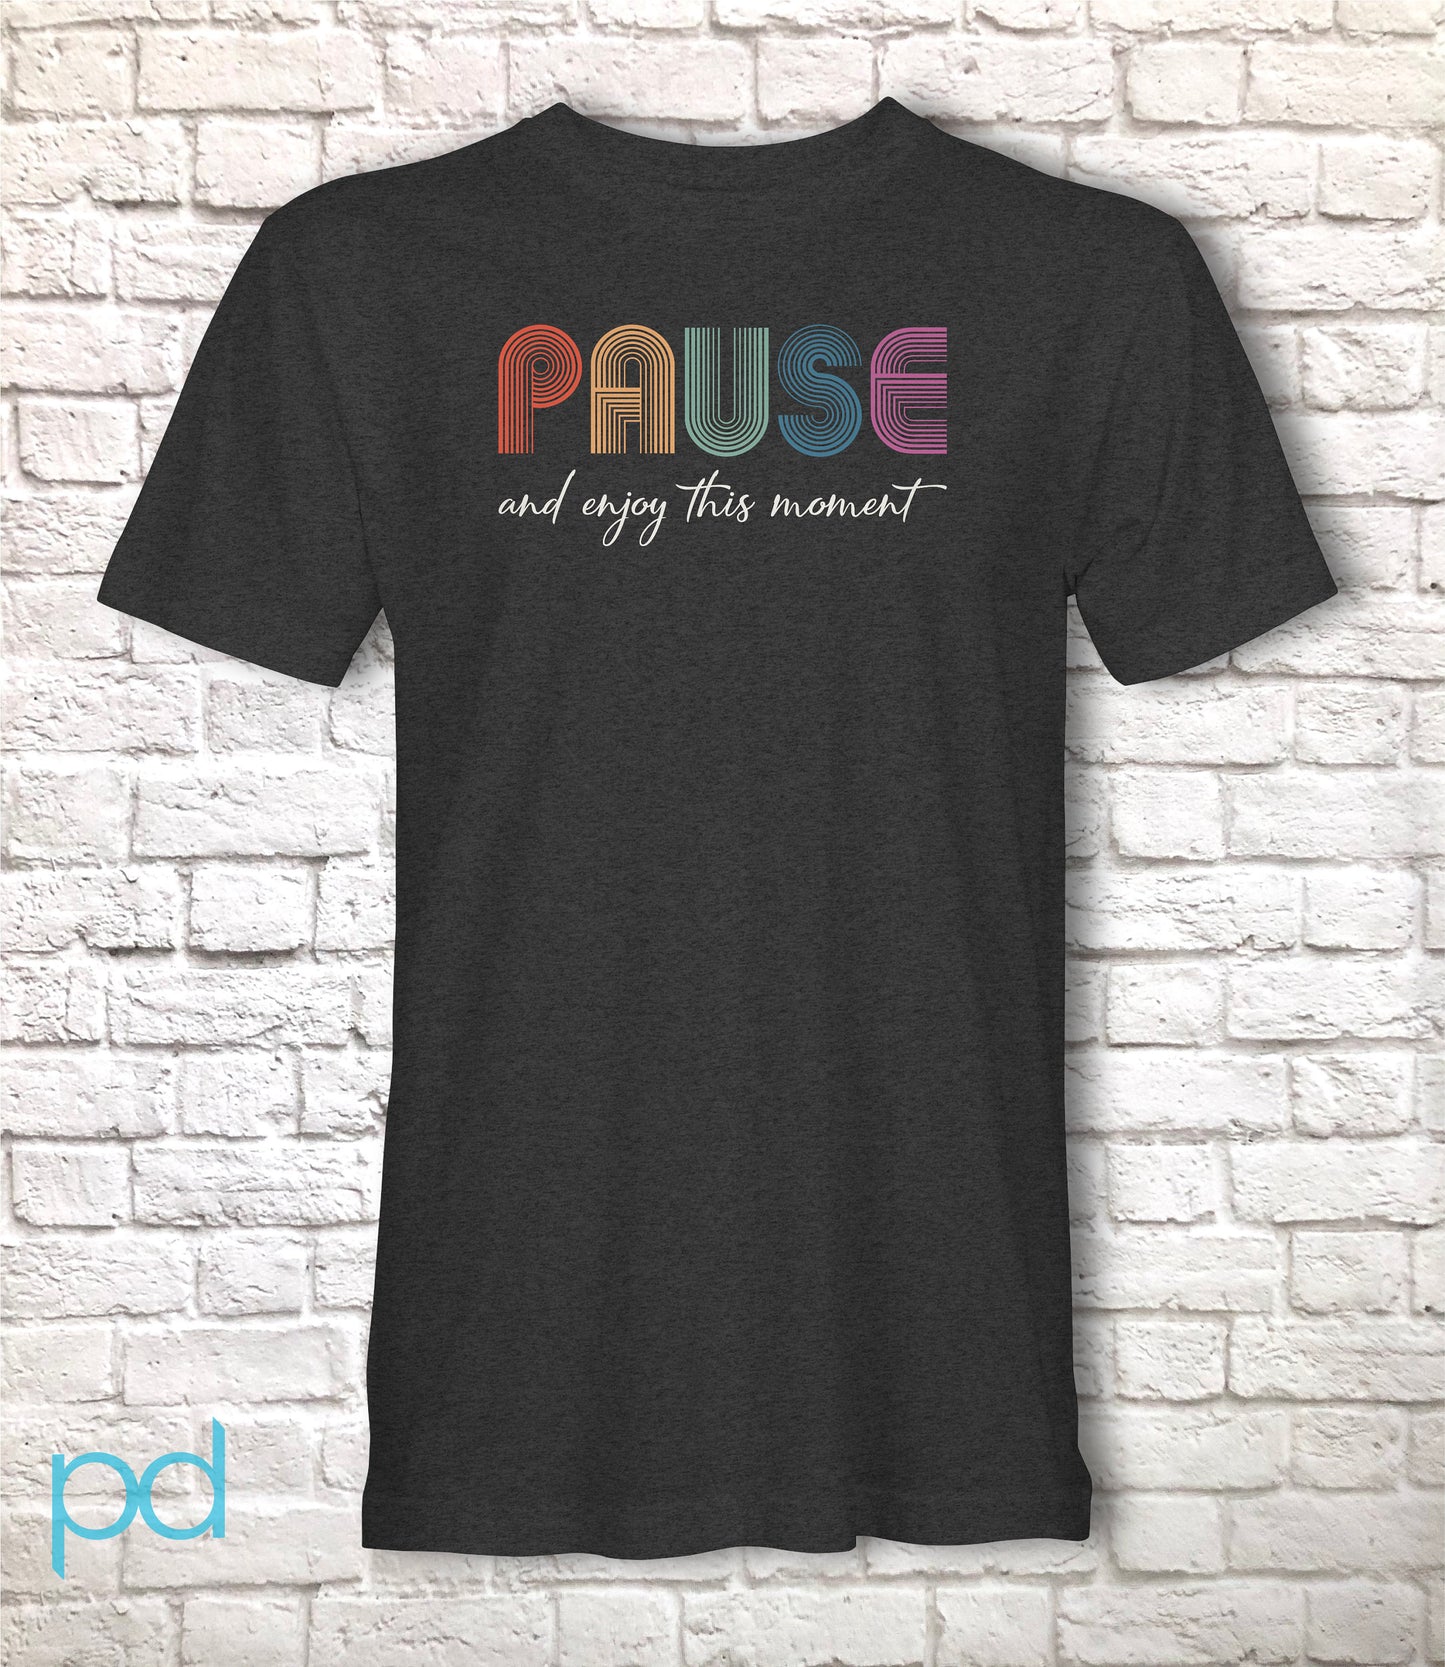 PAUSE T Shirt, Calm Reflection Birthday Gift T-Shirt in Retro Vintage 70s style, Chill Relax Unisex Tee Shirt Top For Men or Women